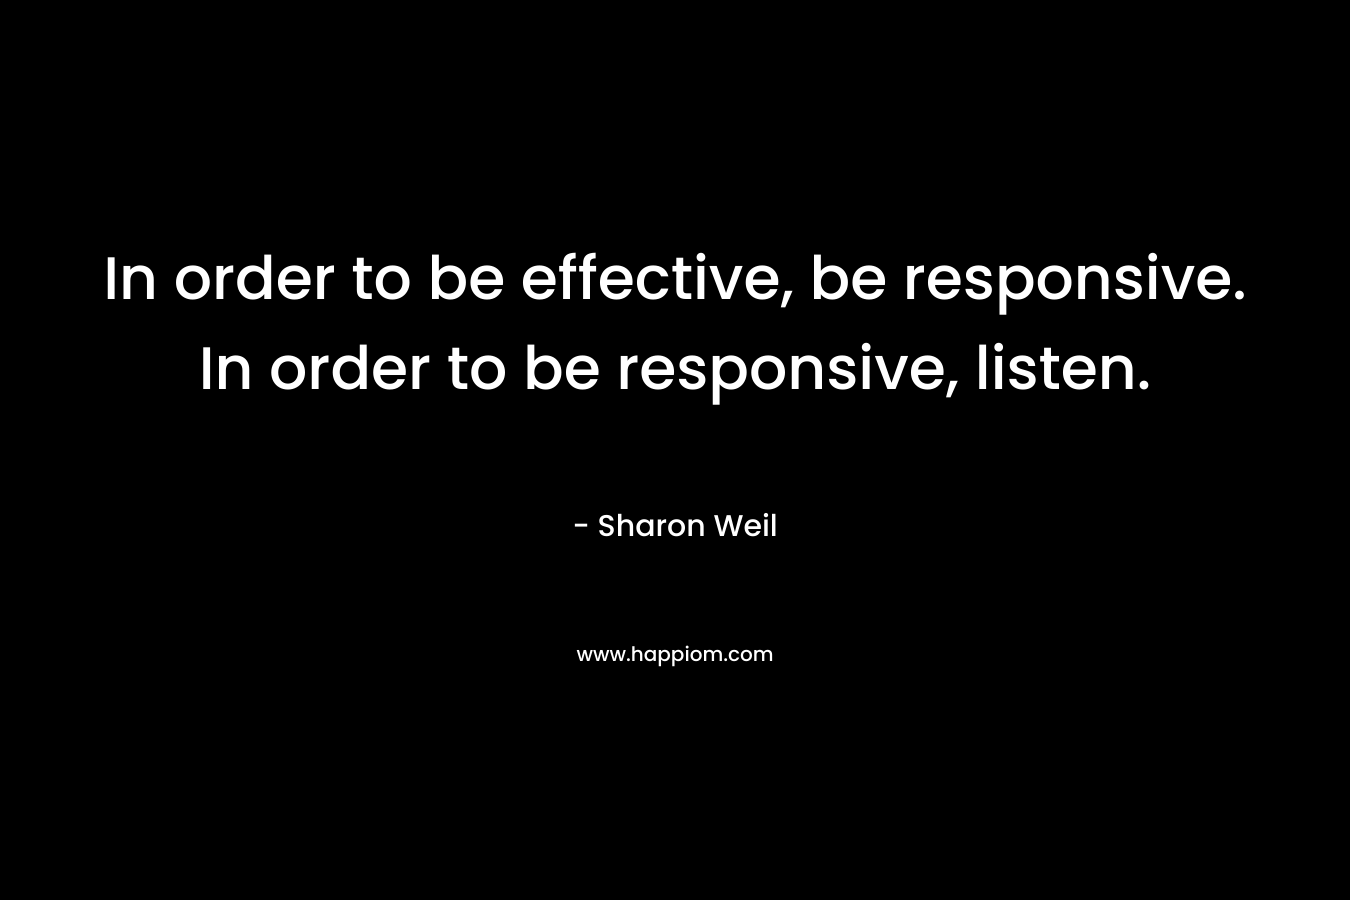 In order to be effective, be responsive. In order to be responsive, listen.